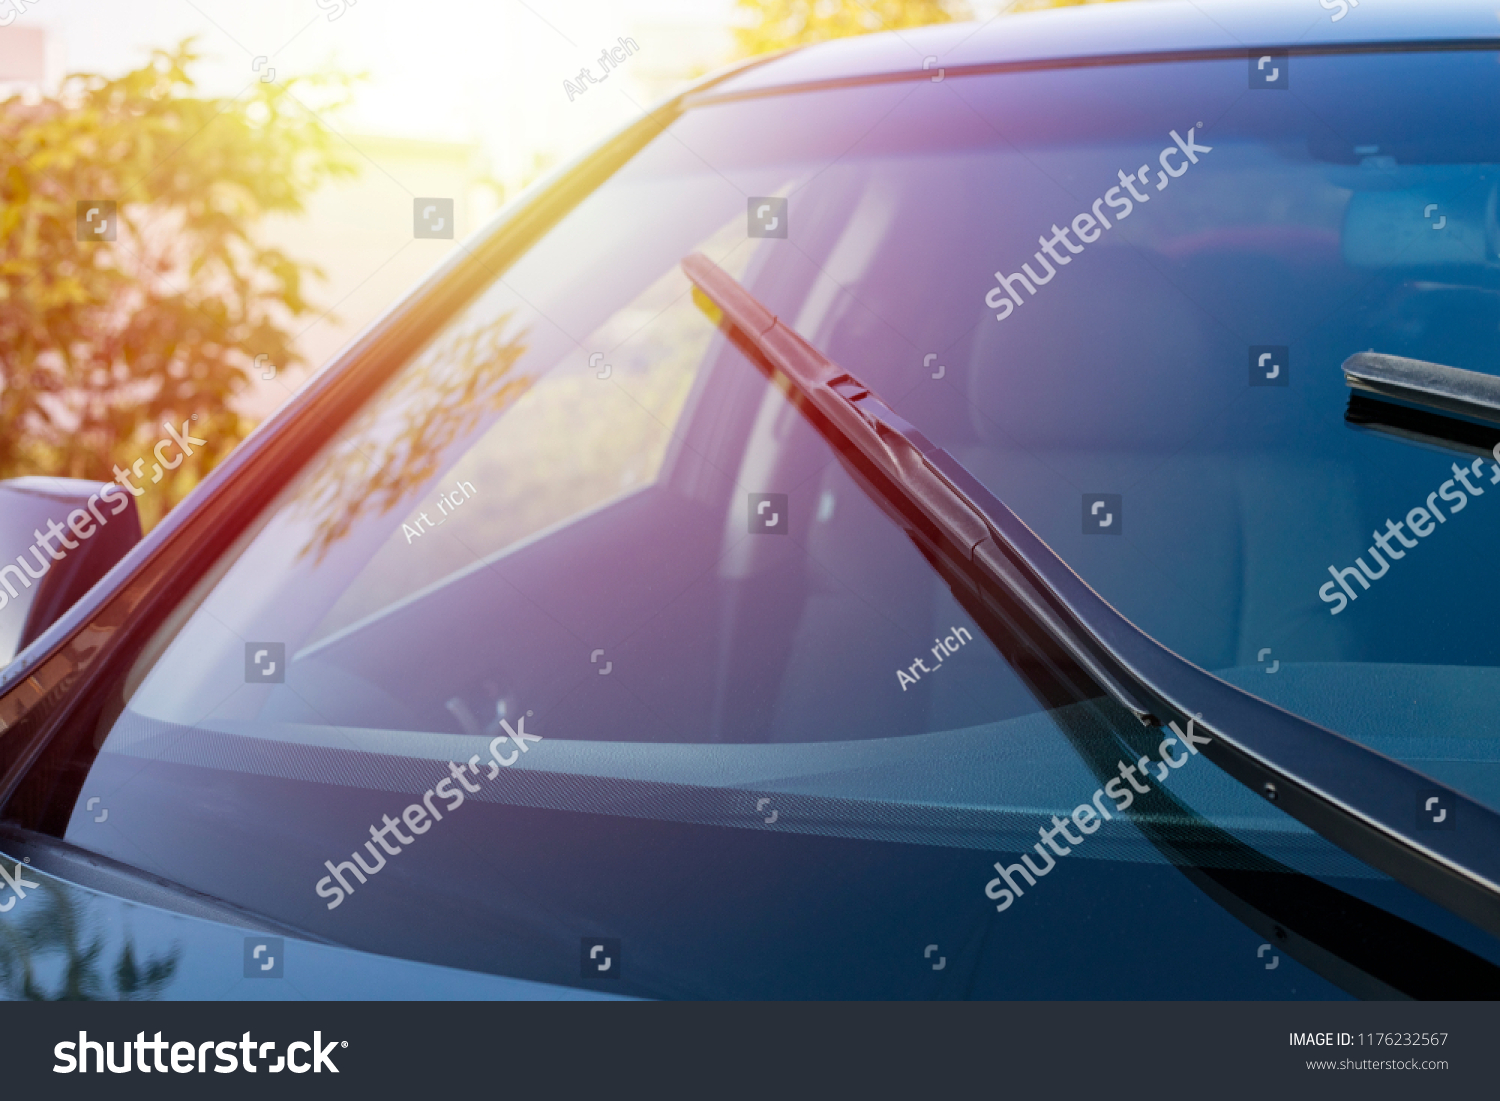 Brushes on the car glass with copy space. The work of windshield wipers - brushes and an evening sunbeam #1176232567